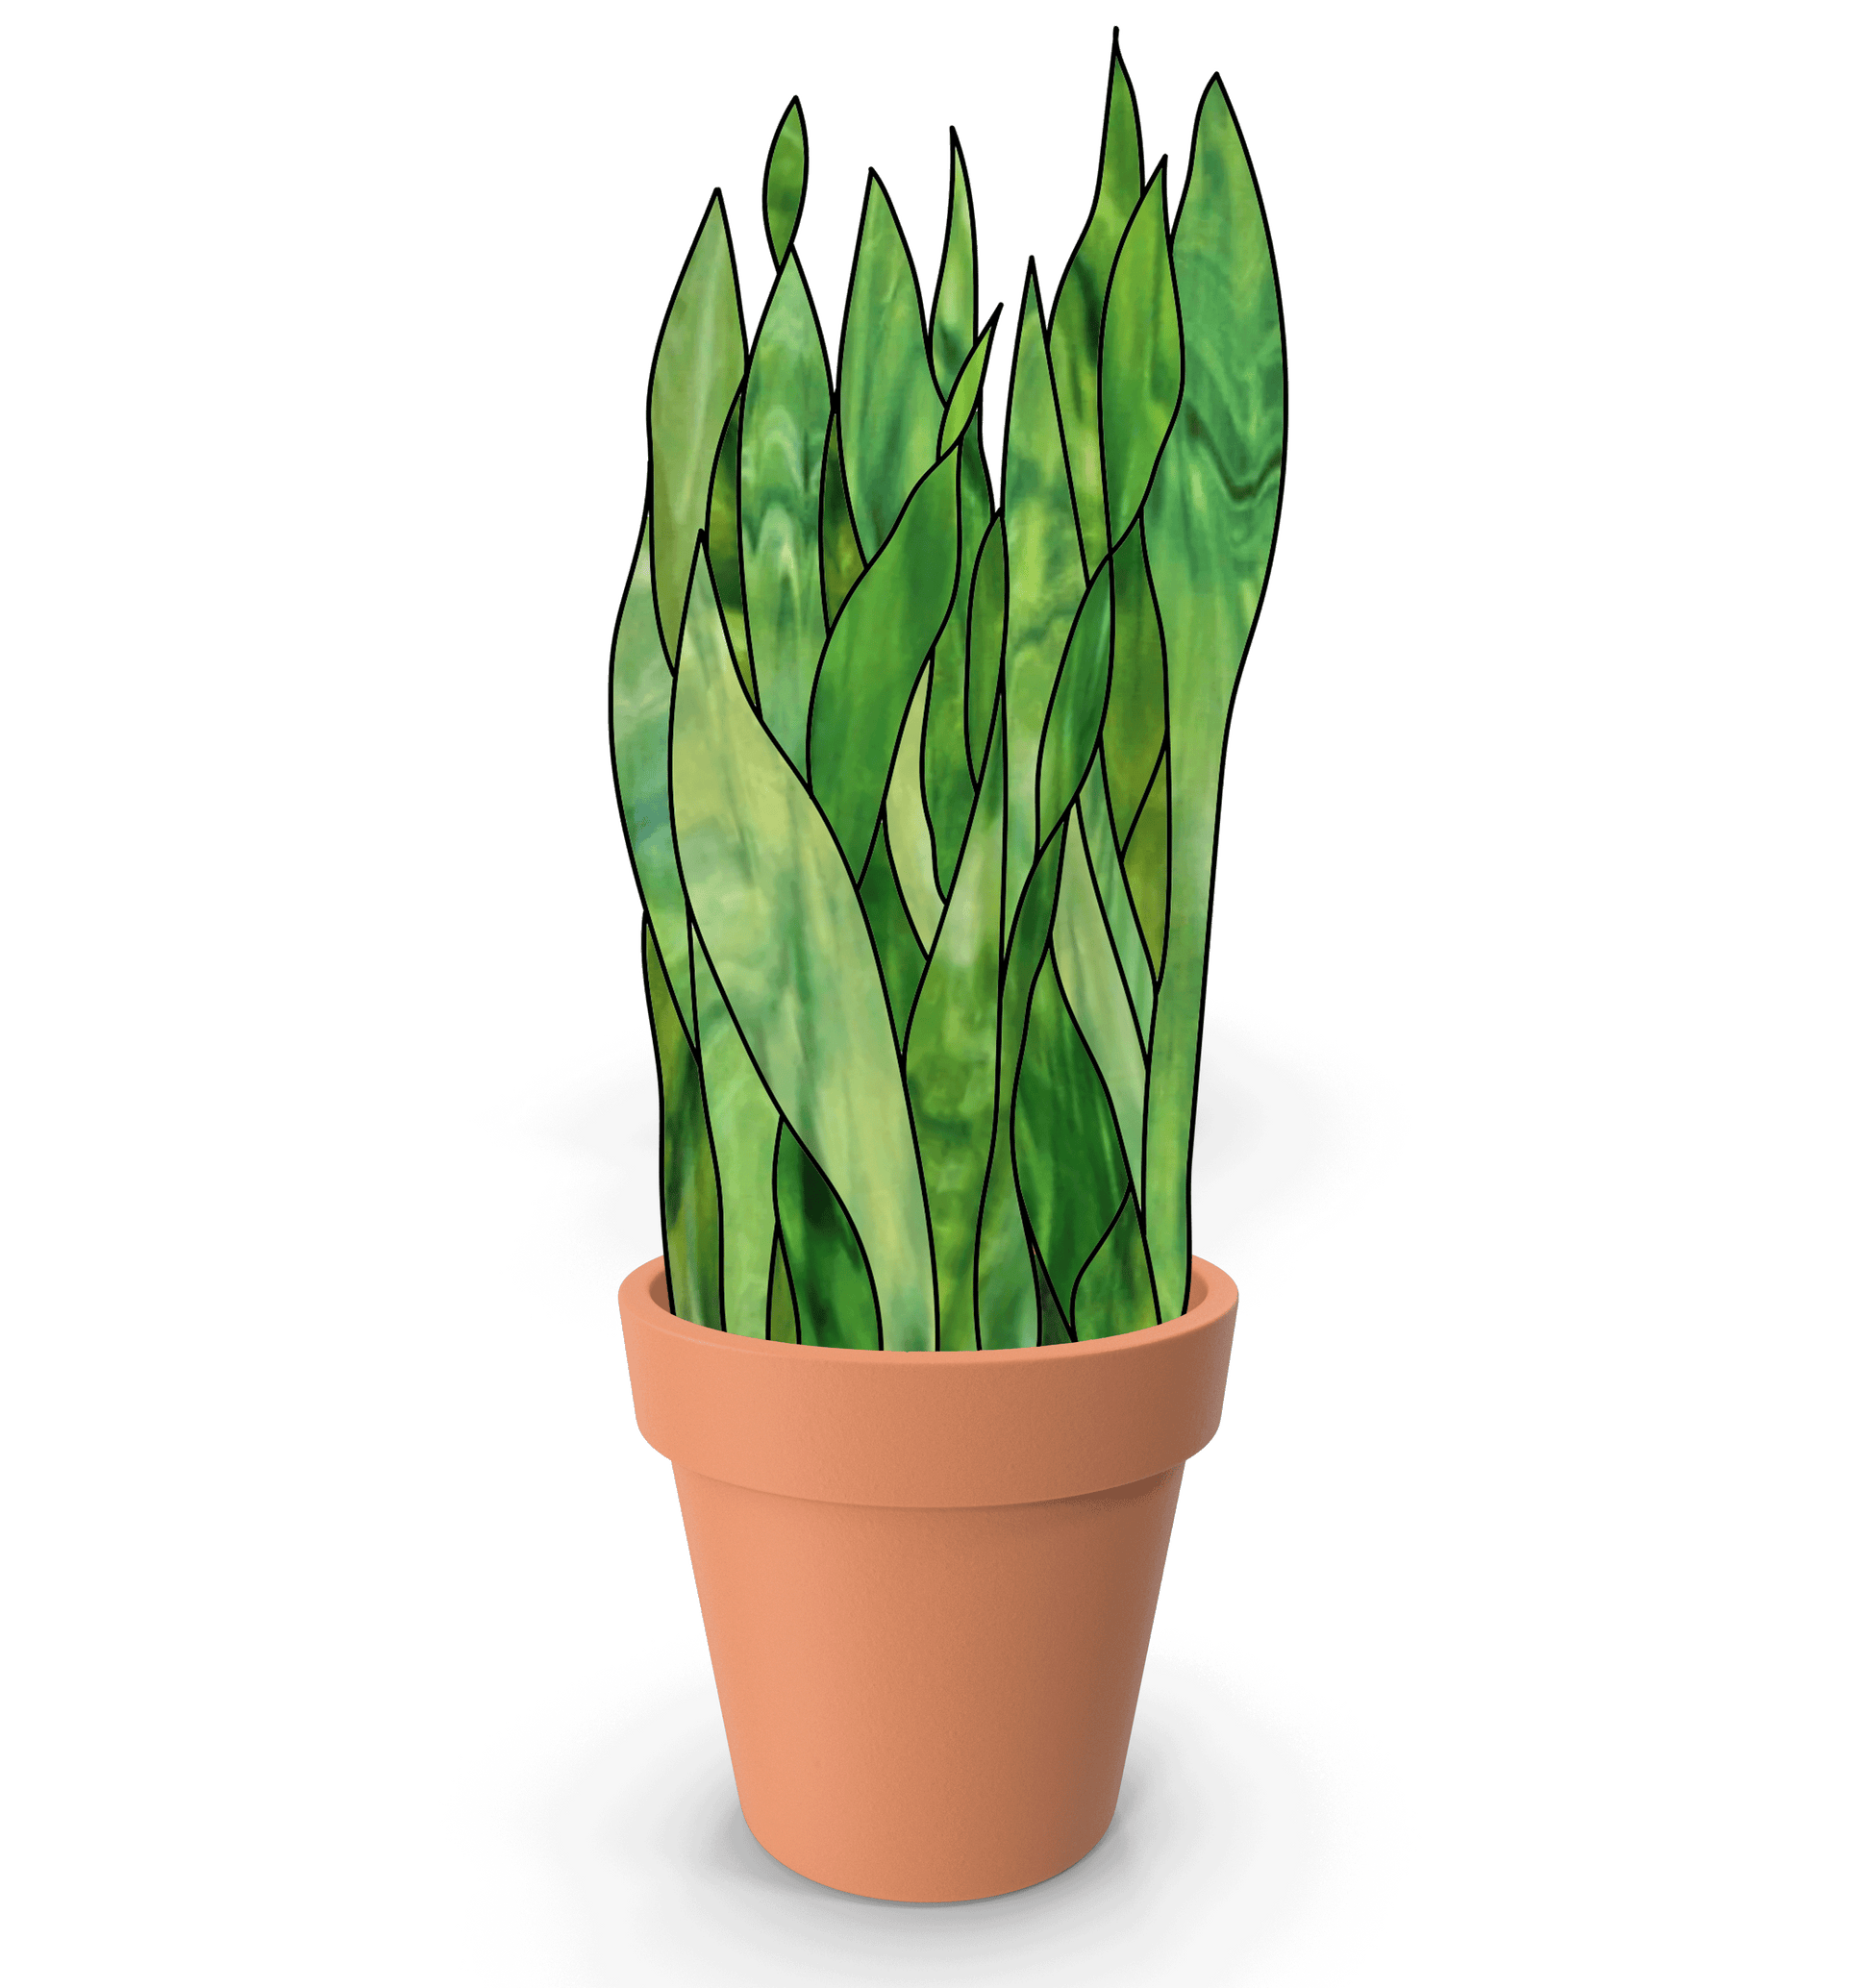 Original stained glass pattern for snake plant plant stem, instant PDF download